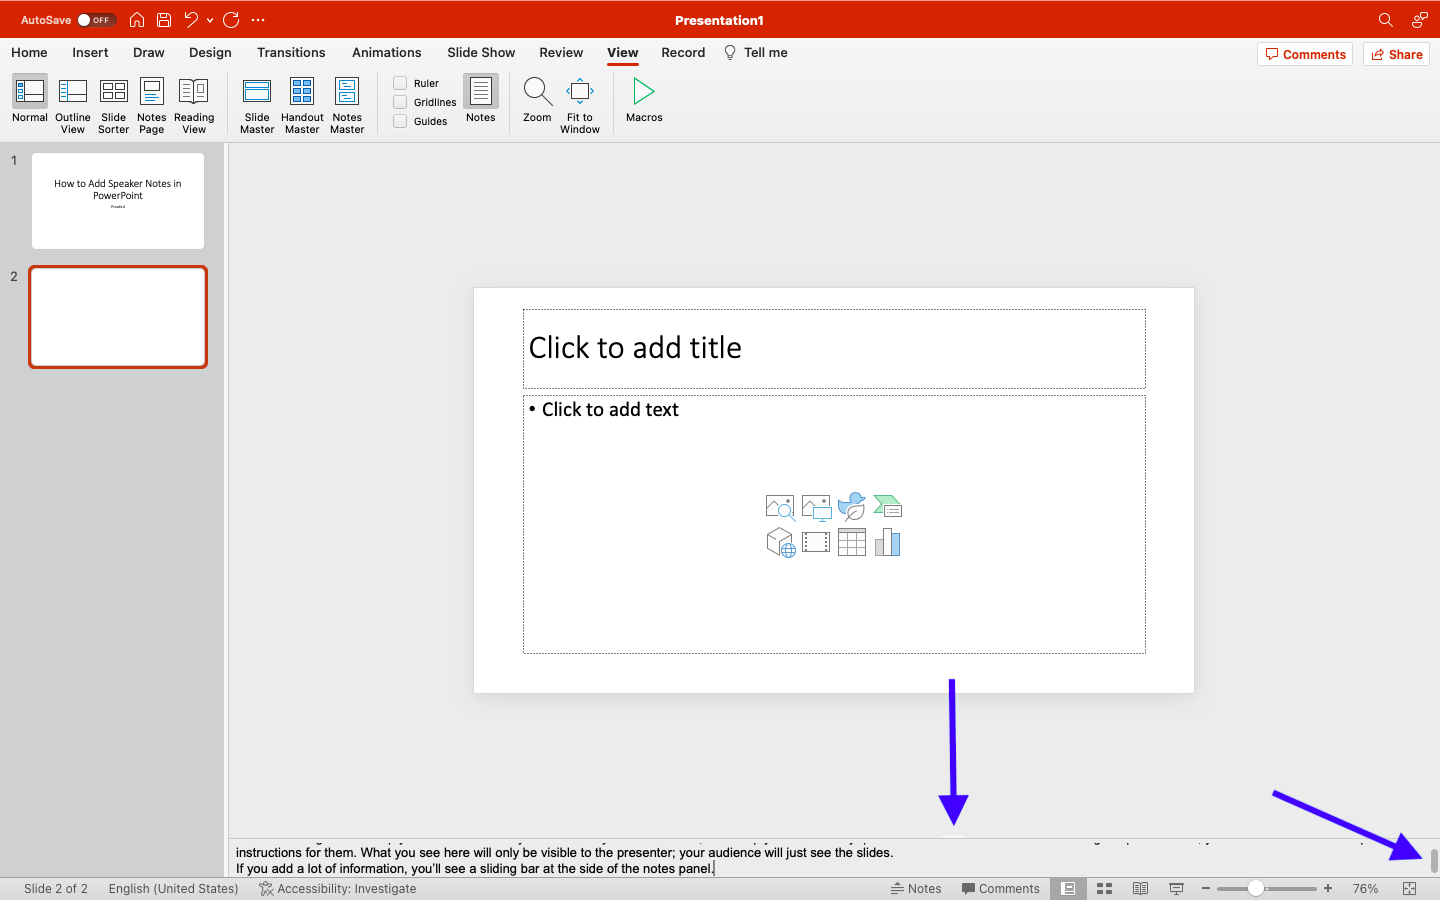 how to make a powerpoint presentation with speaker notes